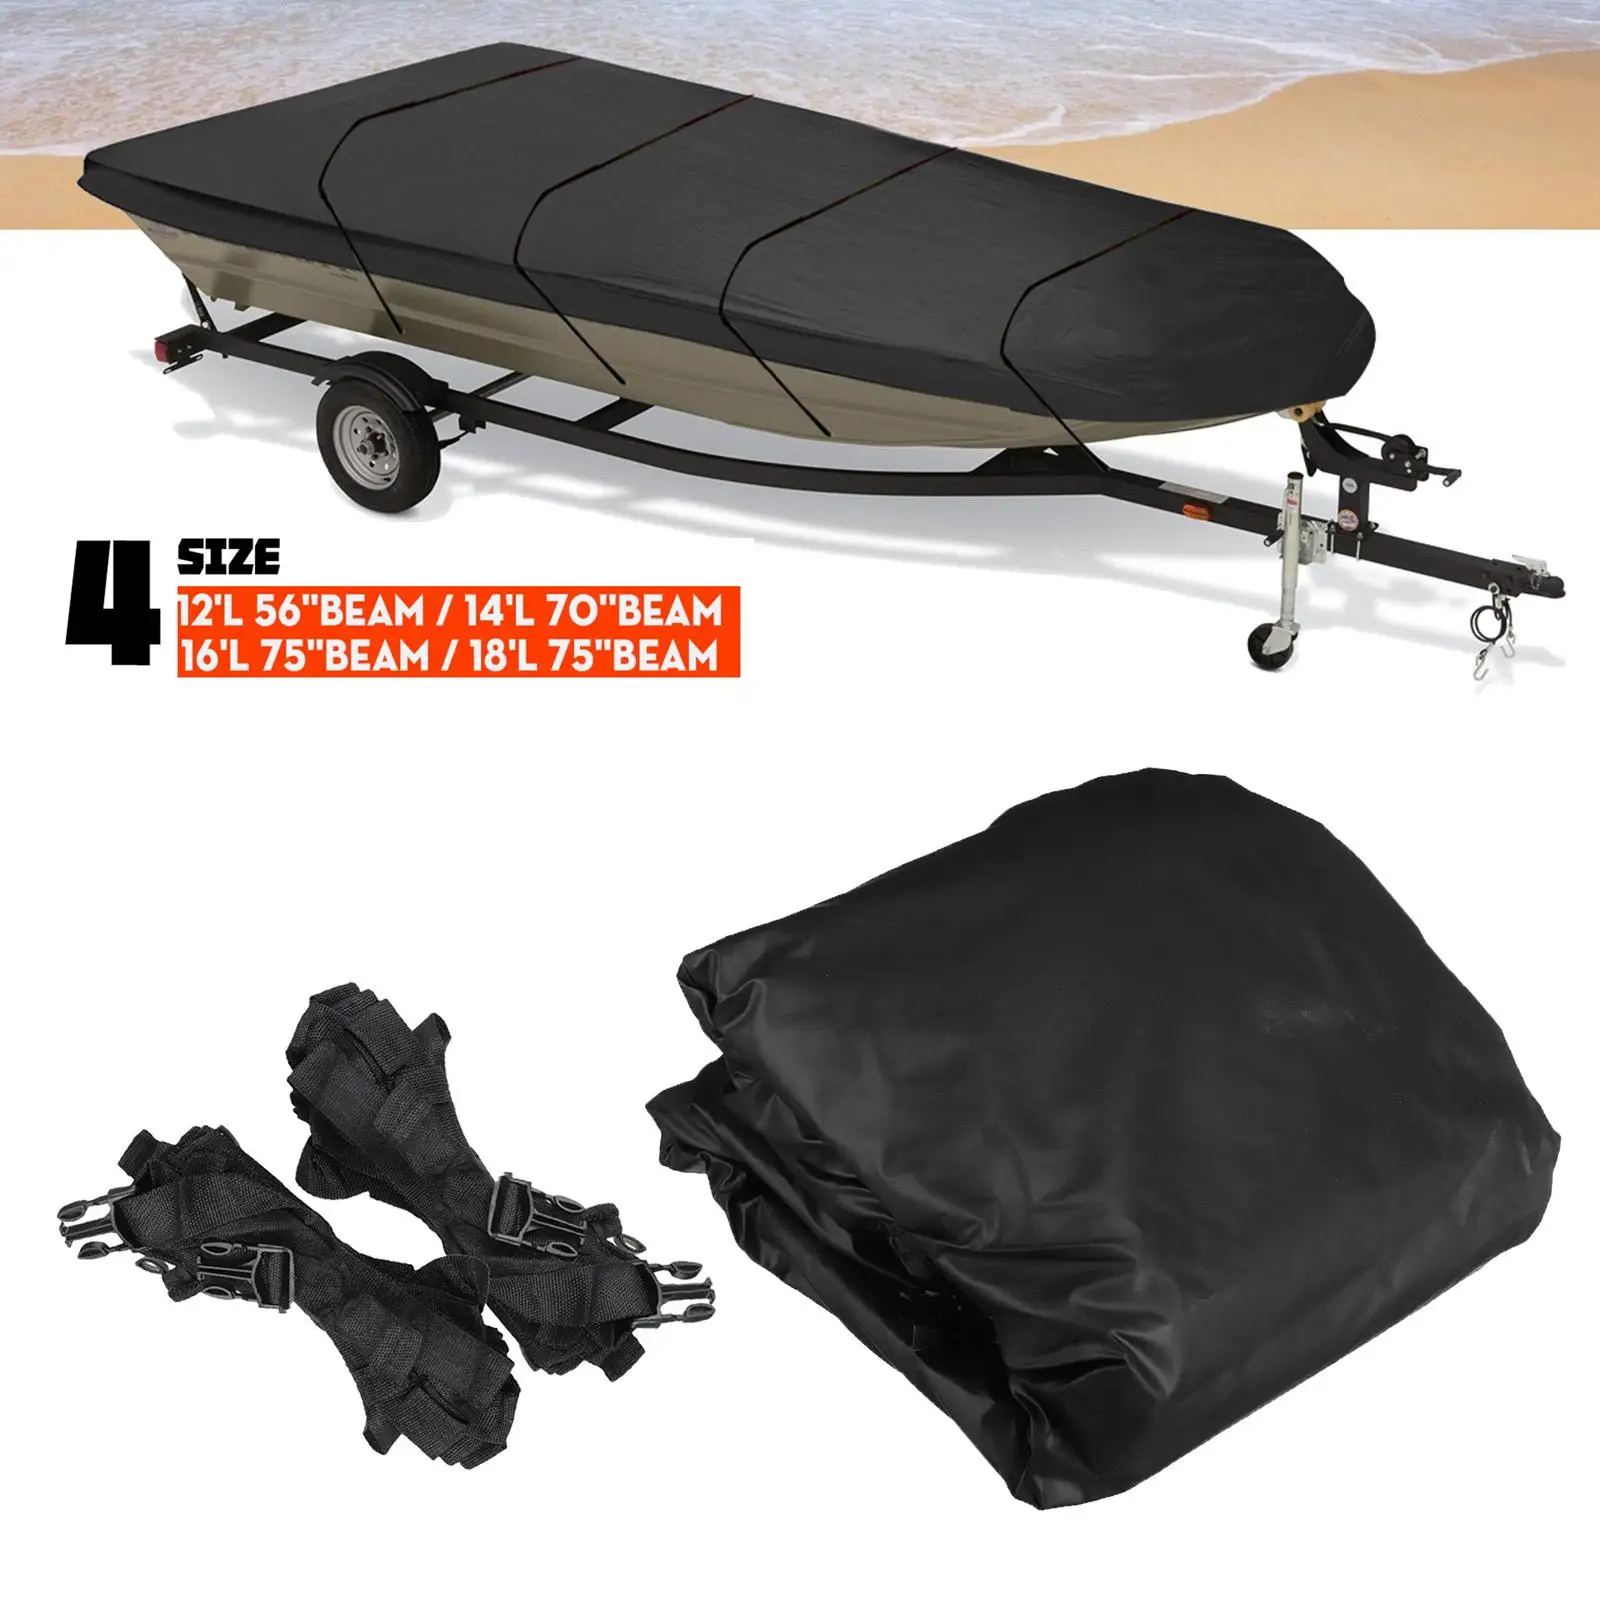 1 Set  Cover Replacement   Black Durable Long-Term  Waterproof Fits for Heavy Duty Marine Trailerable Boat